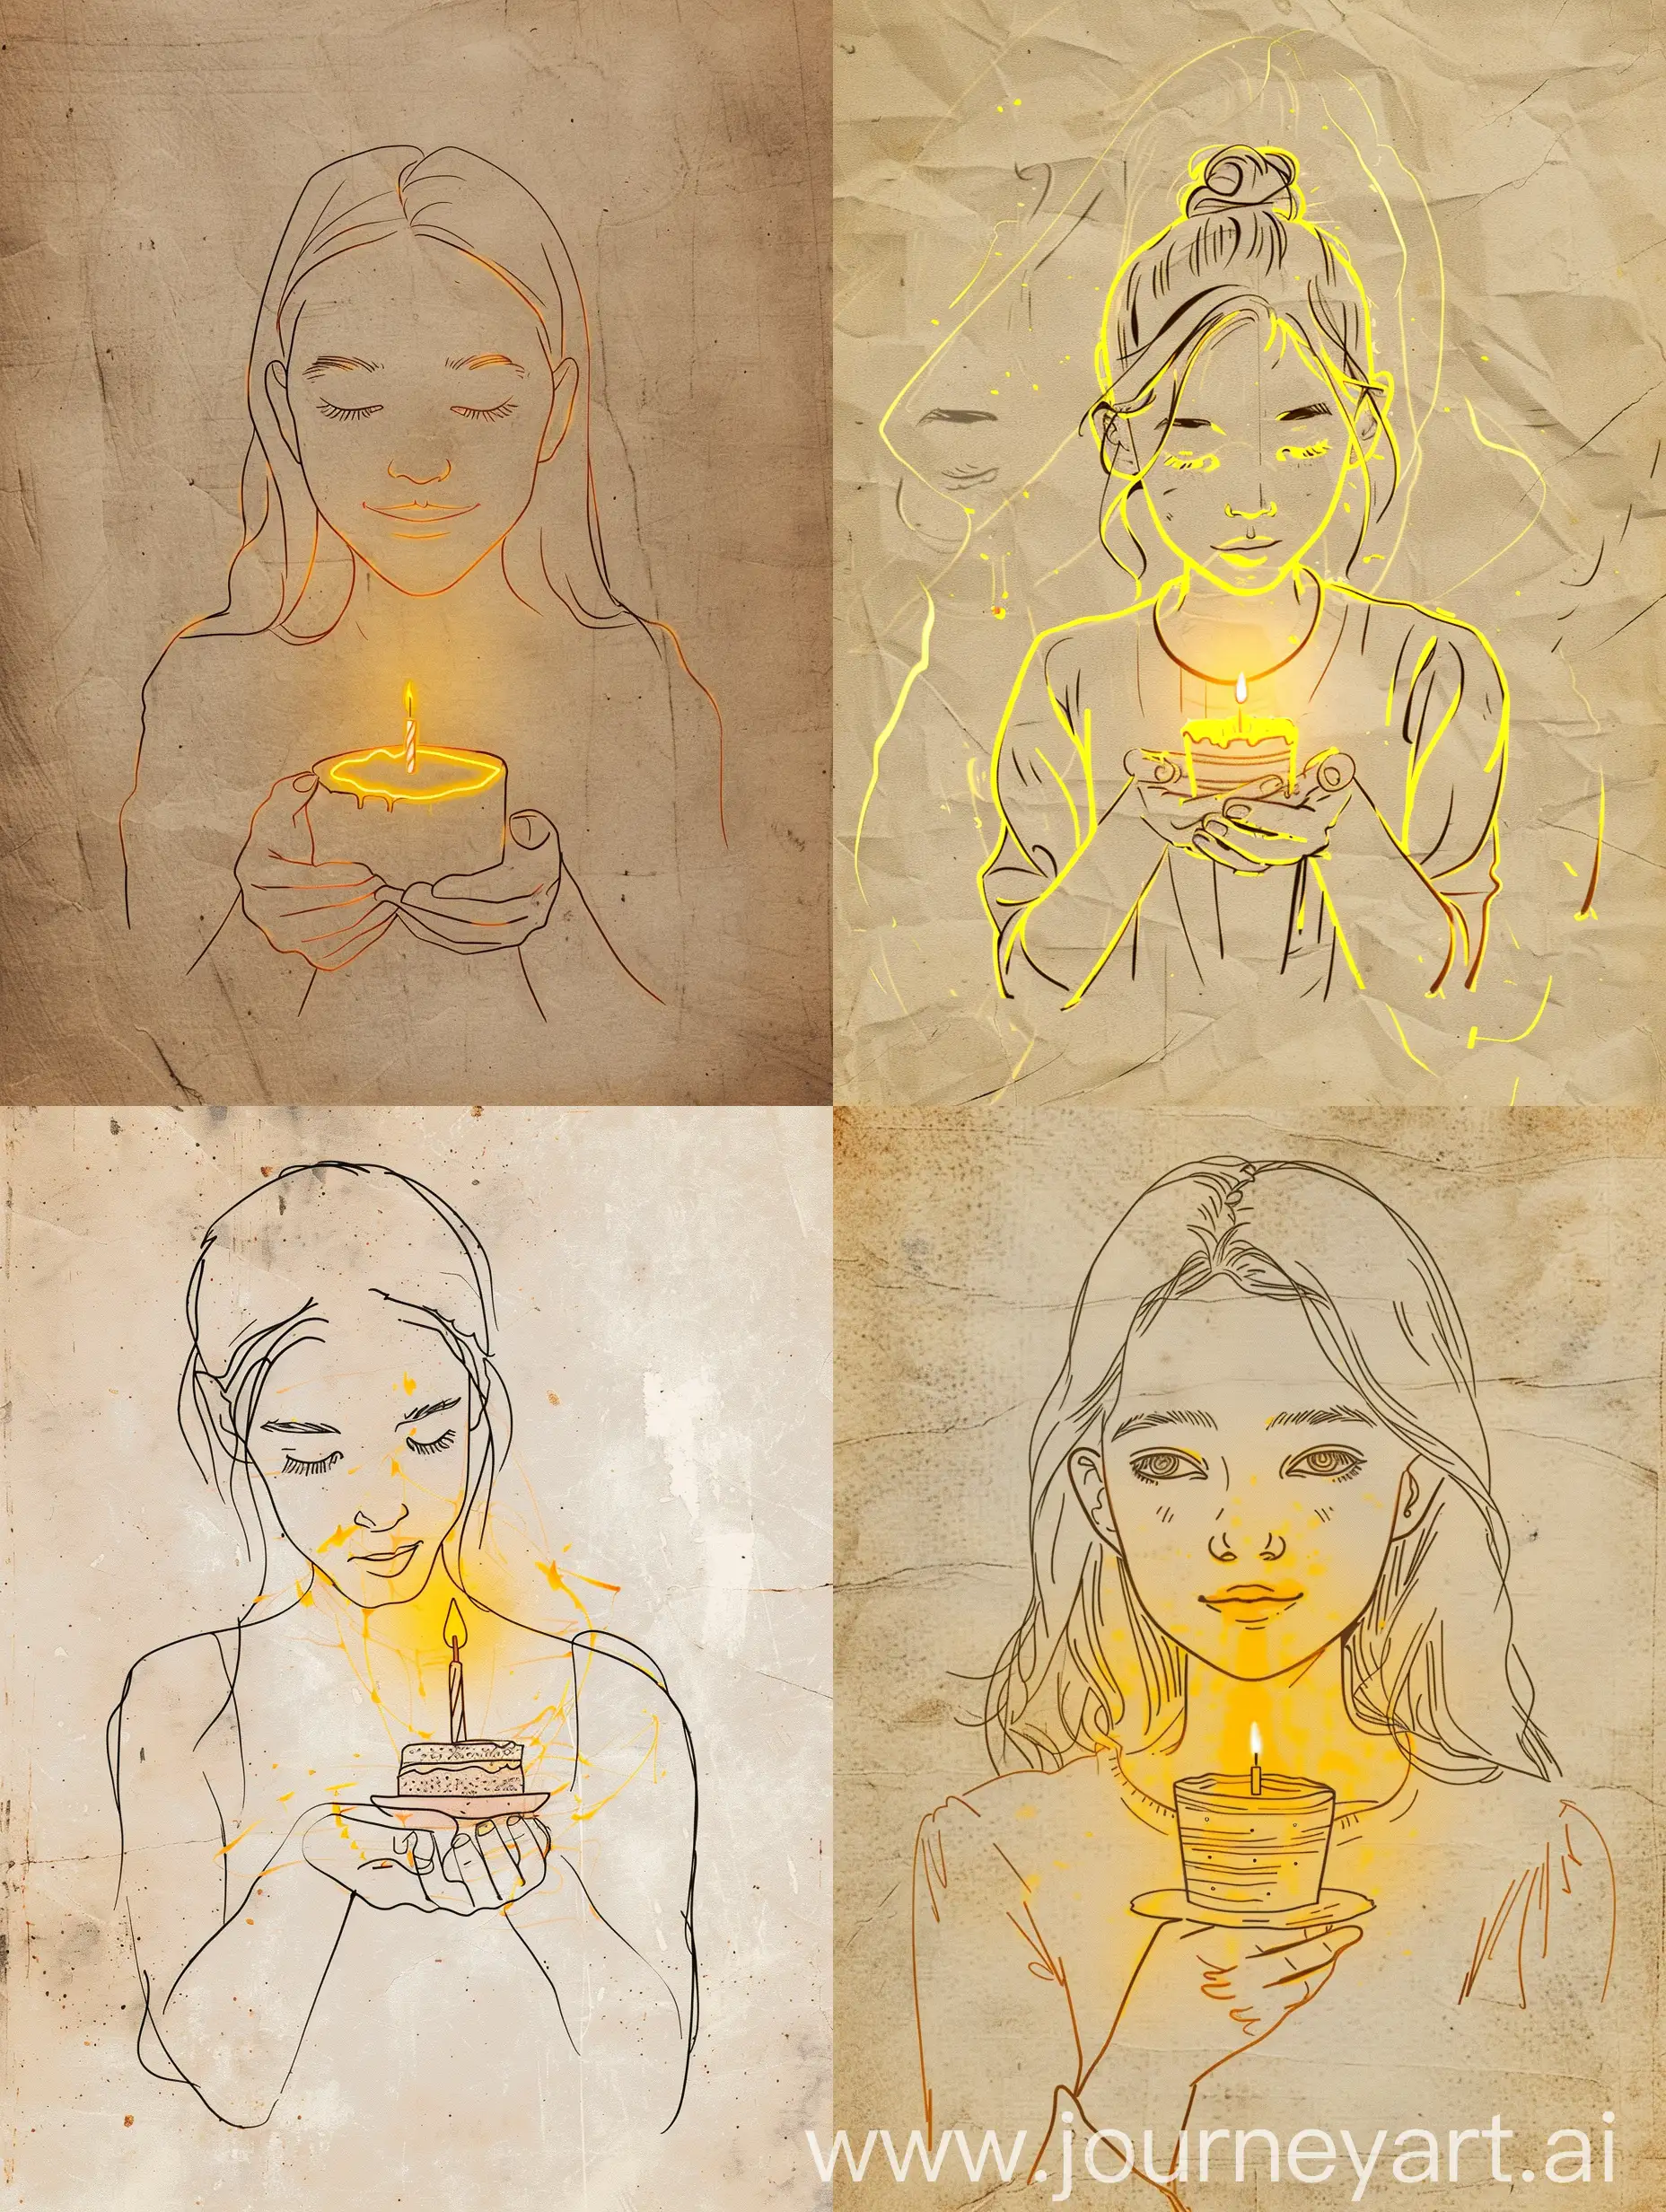 a very simple and minimalist outline sketch/line drawing portrait on old paper depicts a young beautiful girl holding a small cake with one lit candle on it. The yellow light from the candle illuminates her face in the drawing, creating the illusion of three-dimensional depth on the minimalist outline illustration. 